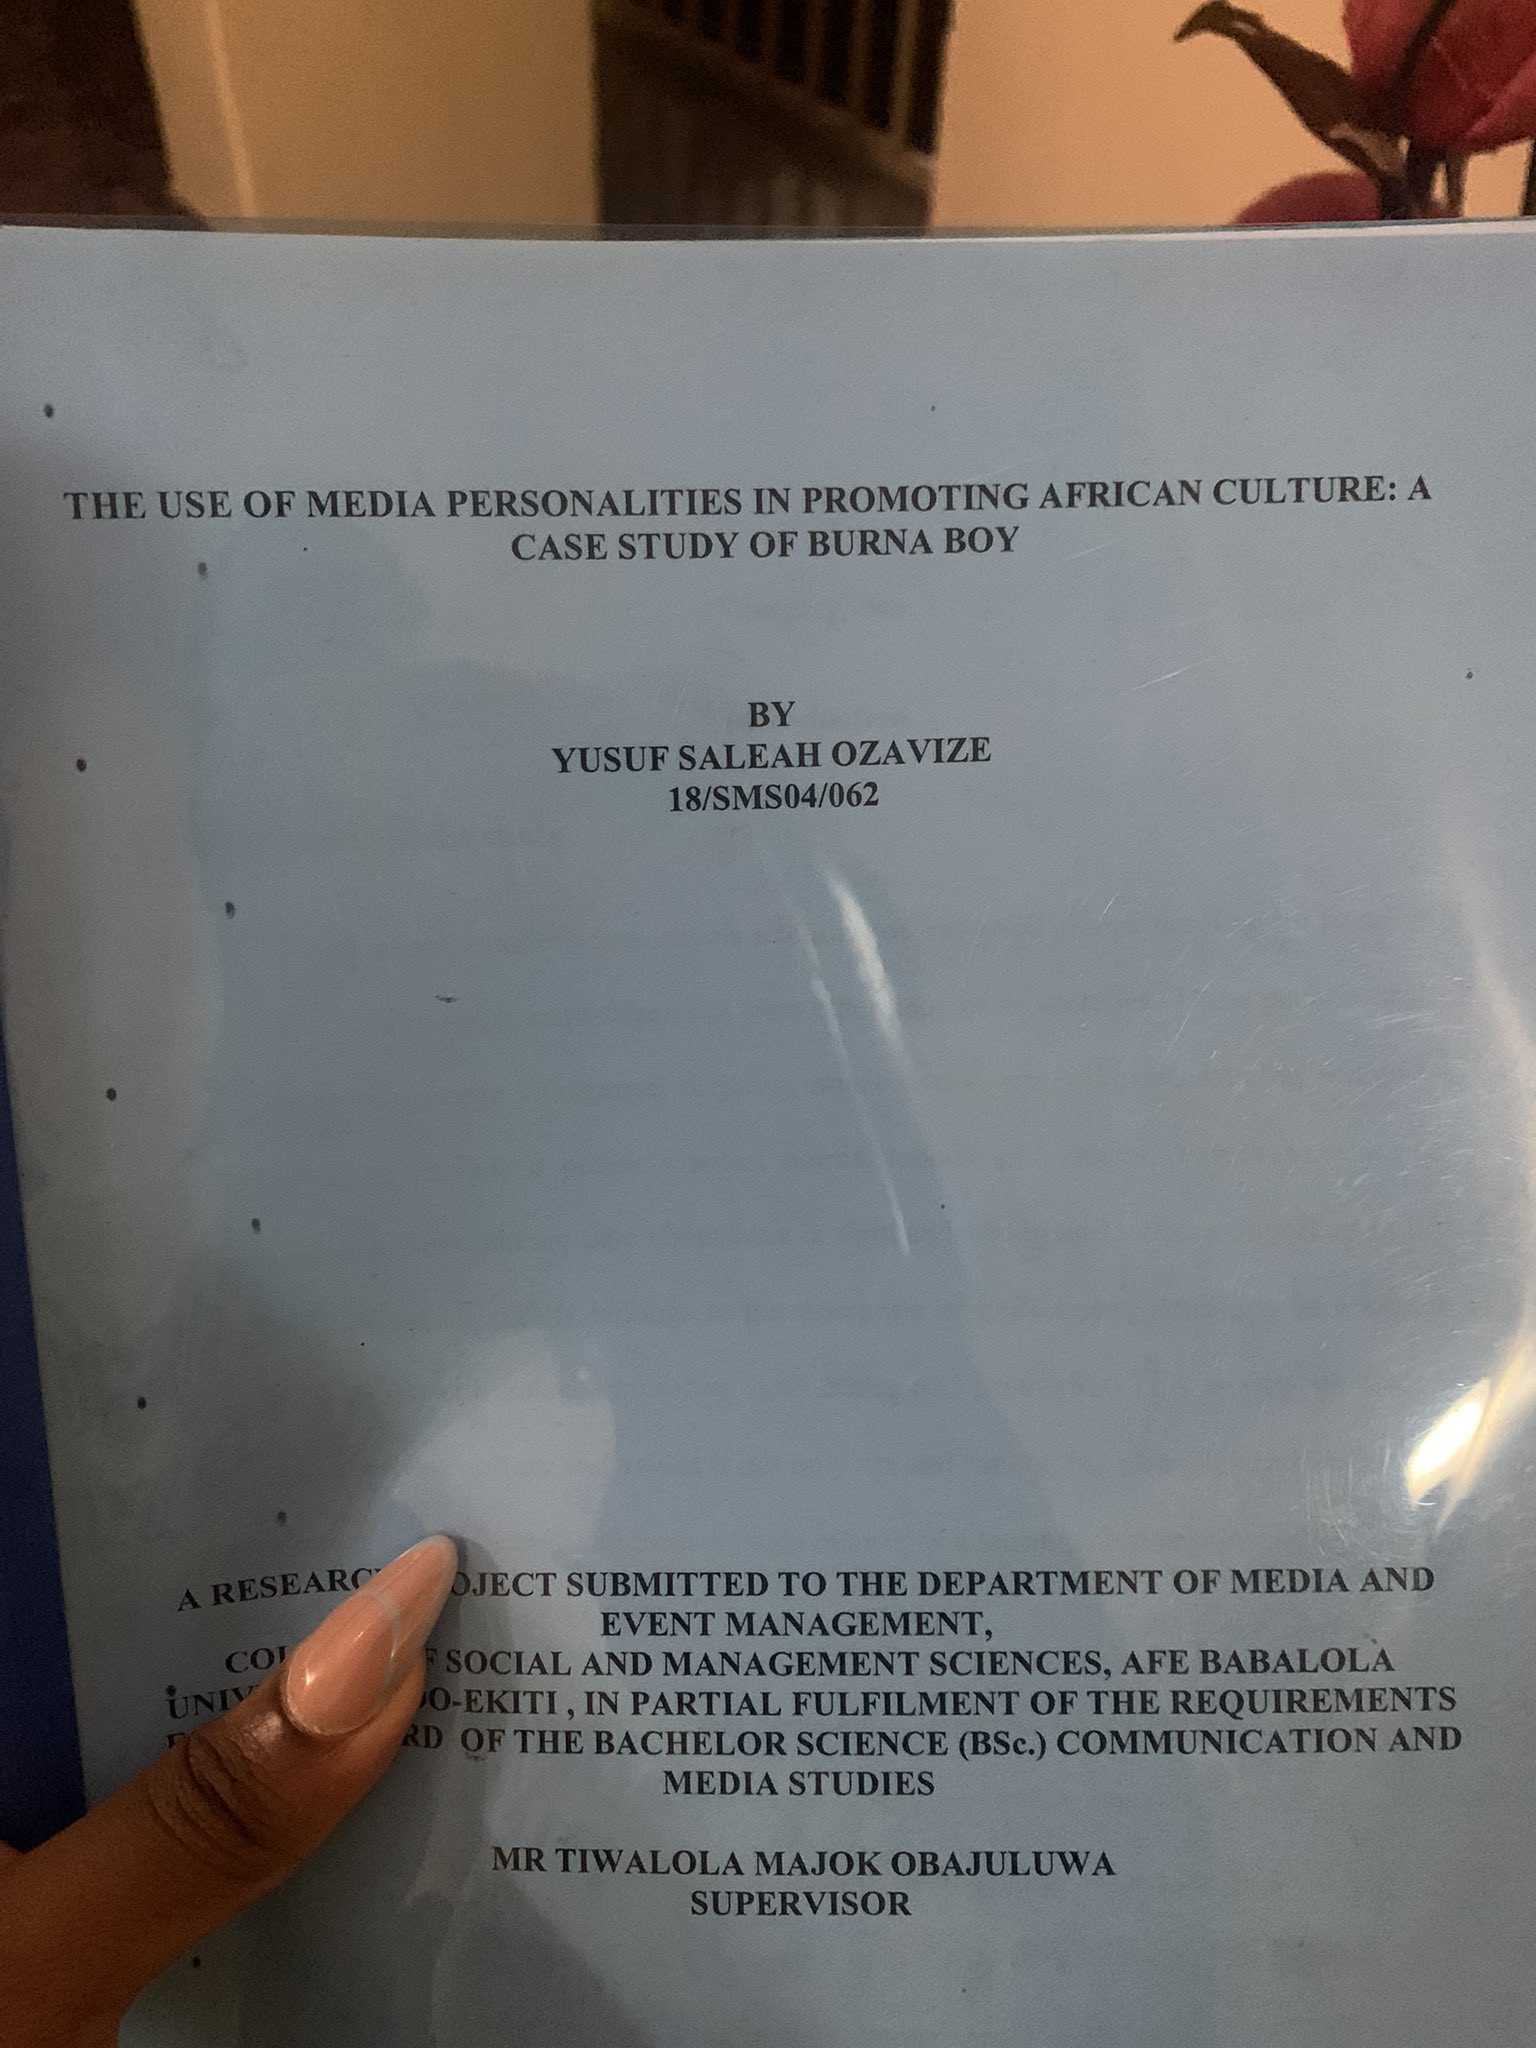 Lady gets an A in her project after using Burna Boy as her case study